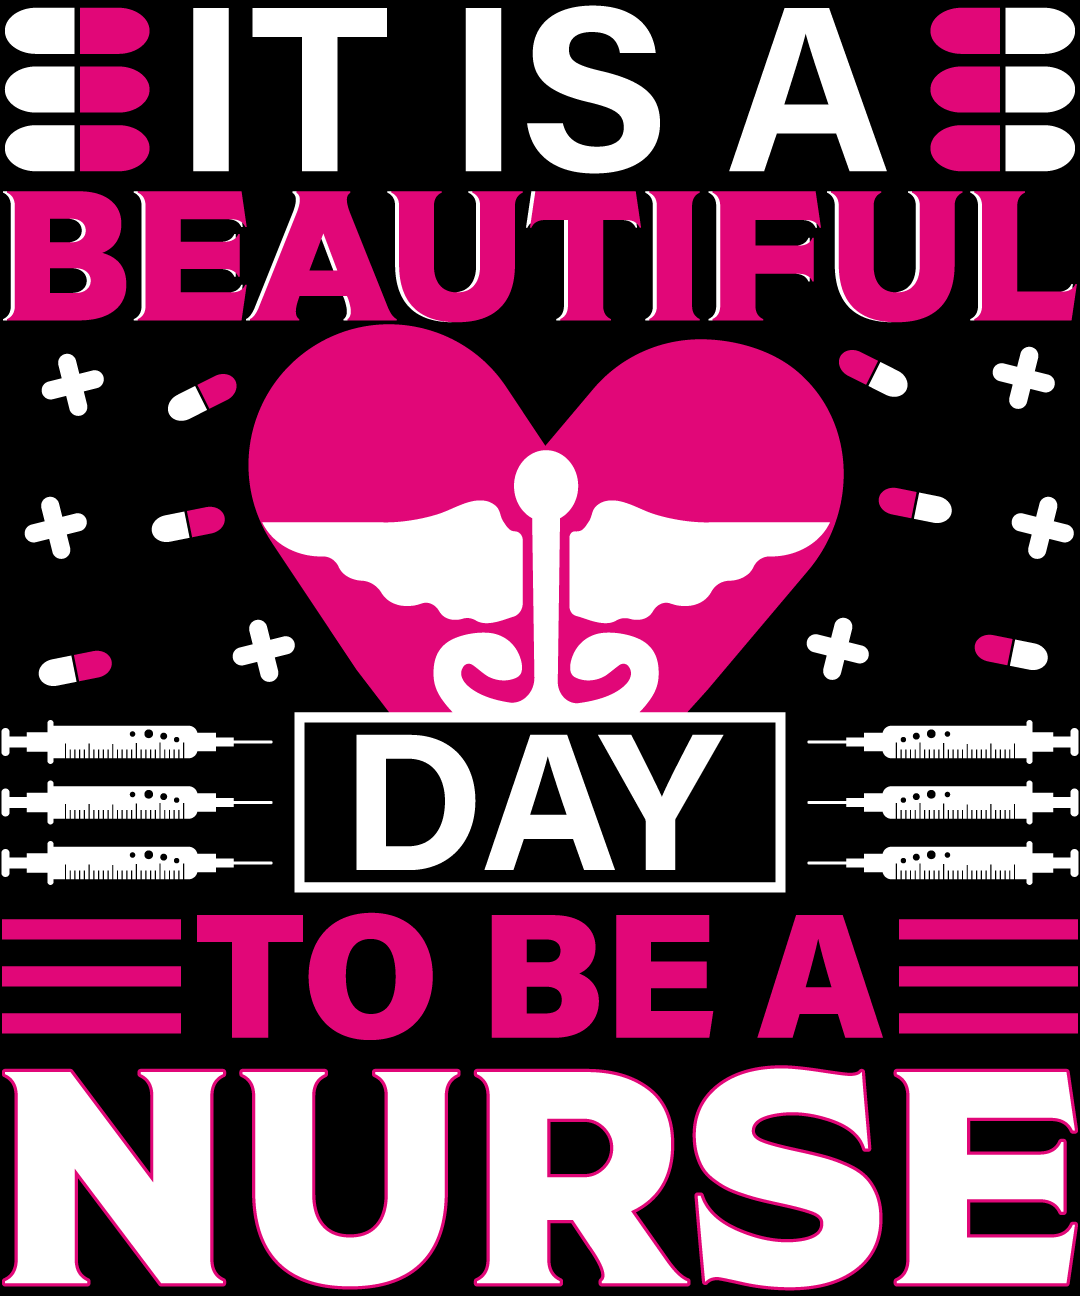 It is a beautiful day to be a nurse.